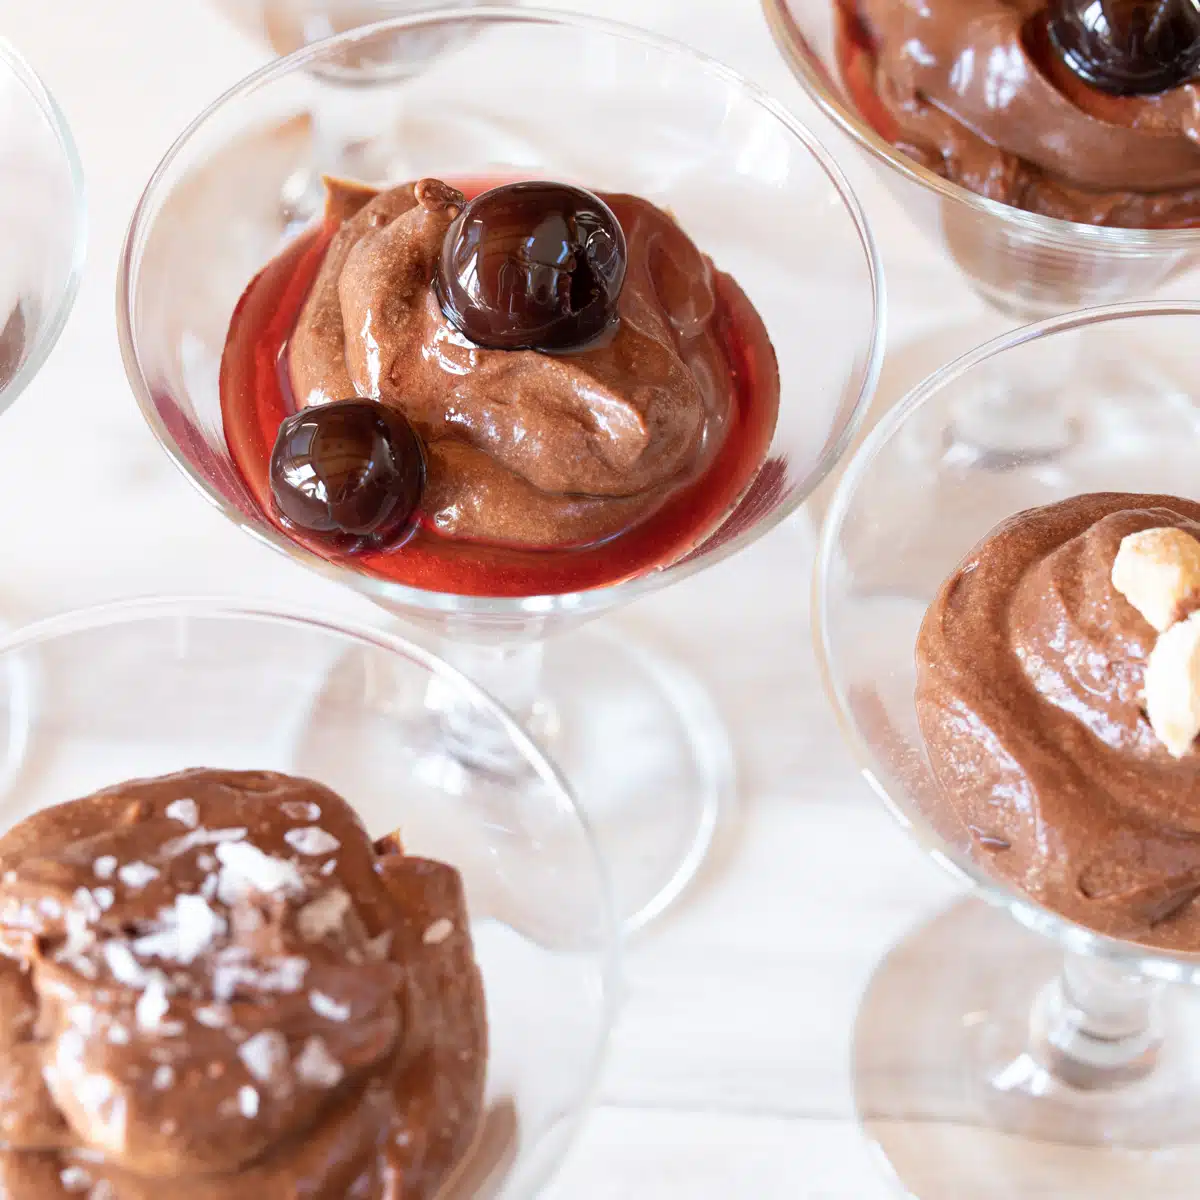 Small glasses filled with Bailey's Chocolate Mousse with different toppings: cherries, nuts, and salt.